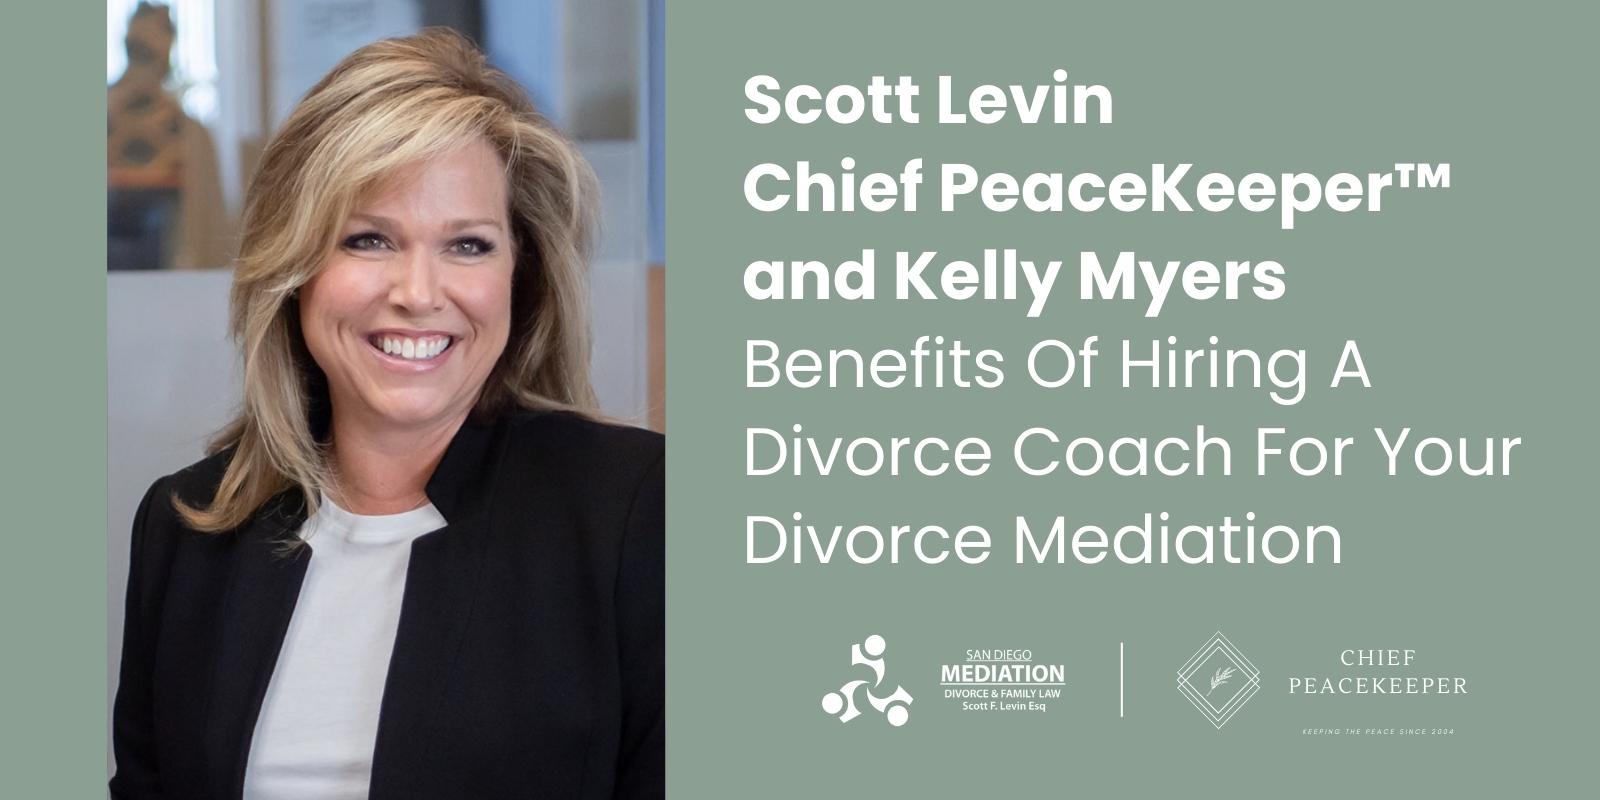 Kelly Myers Benefits Of Hiring A Divorce Coach For Your Divorce Mediation